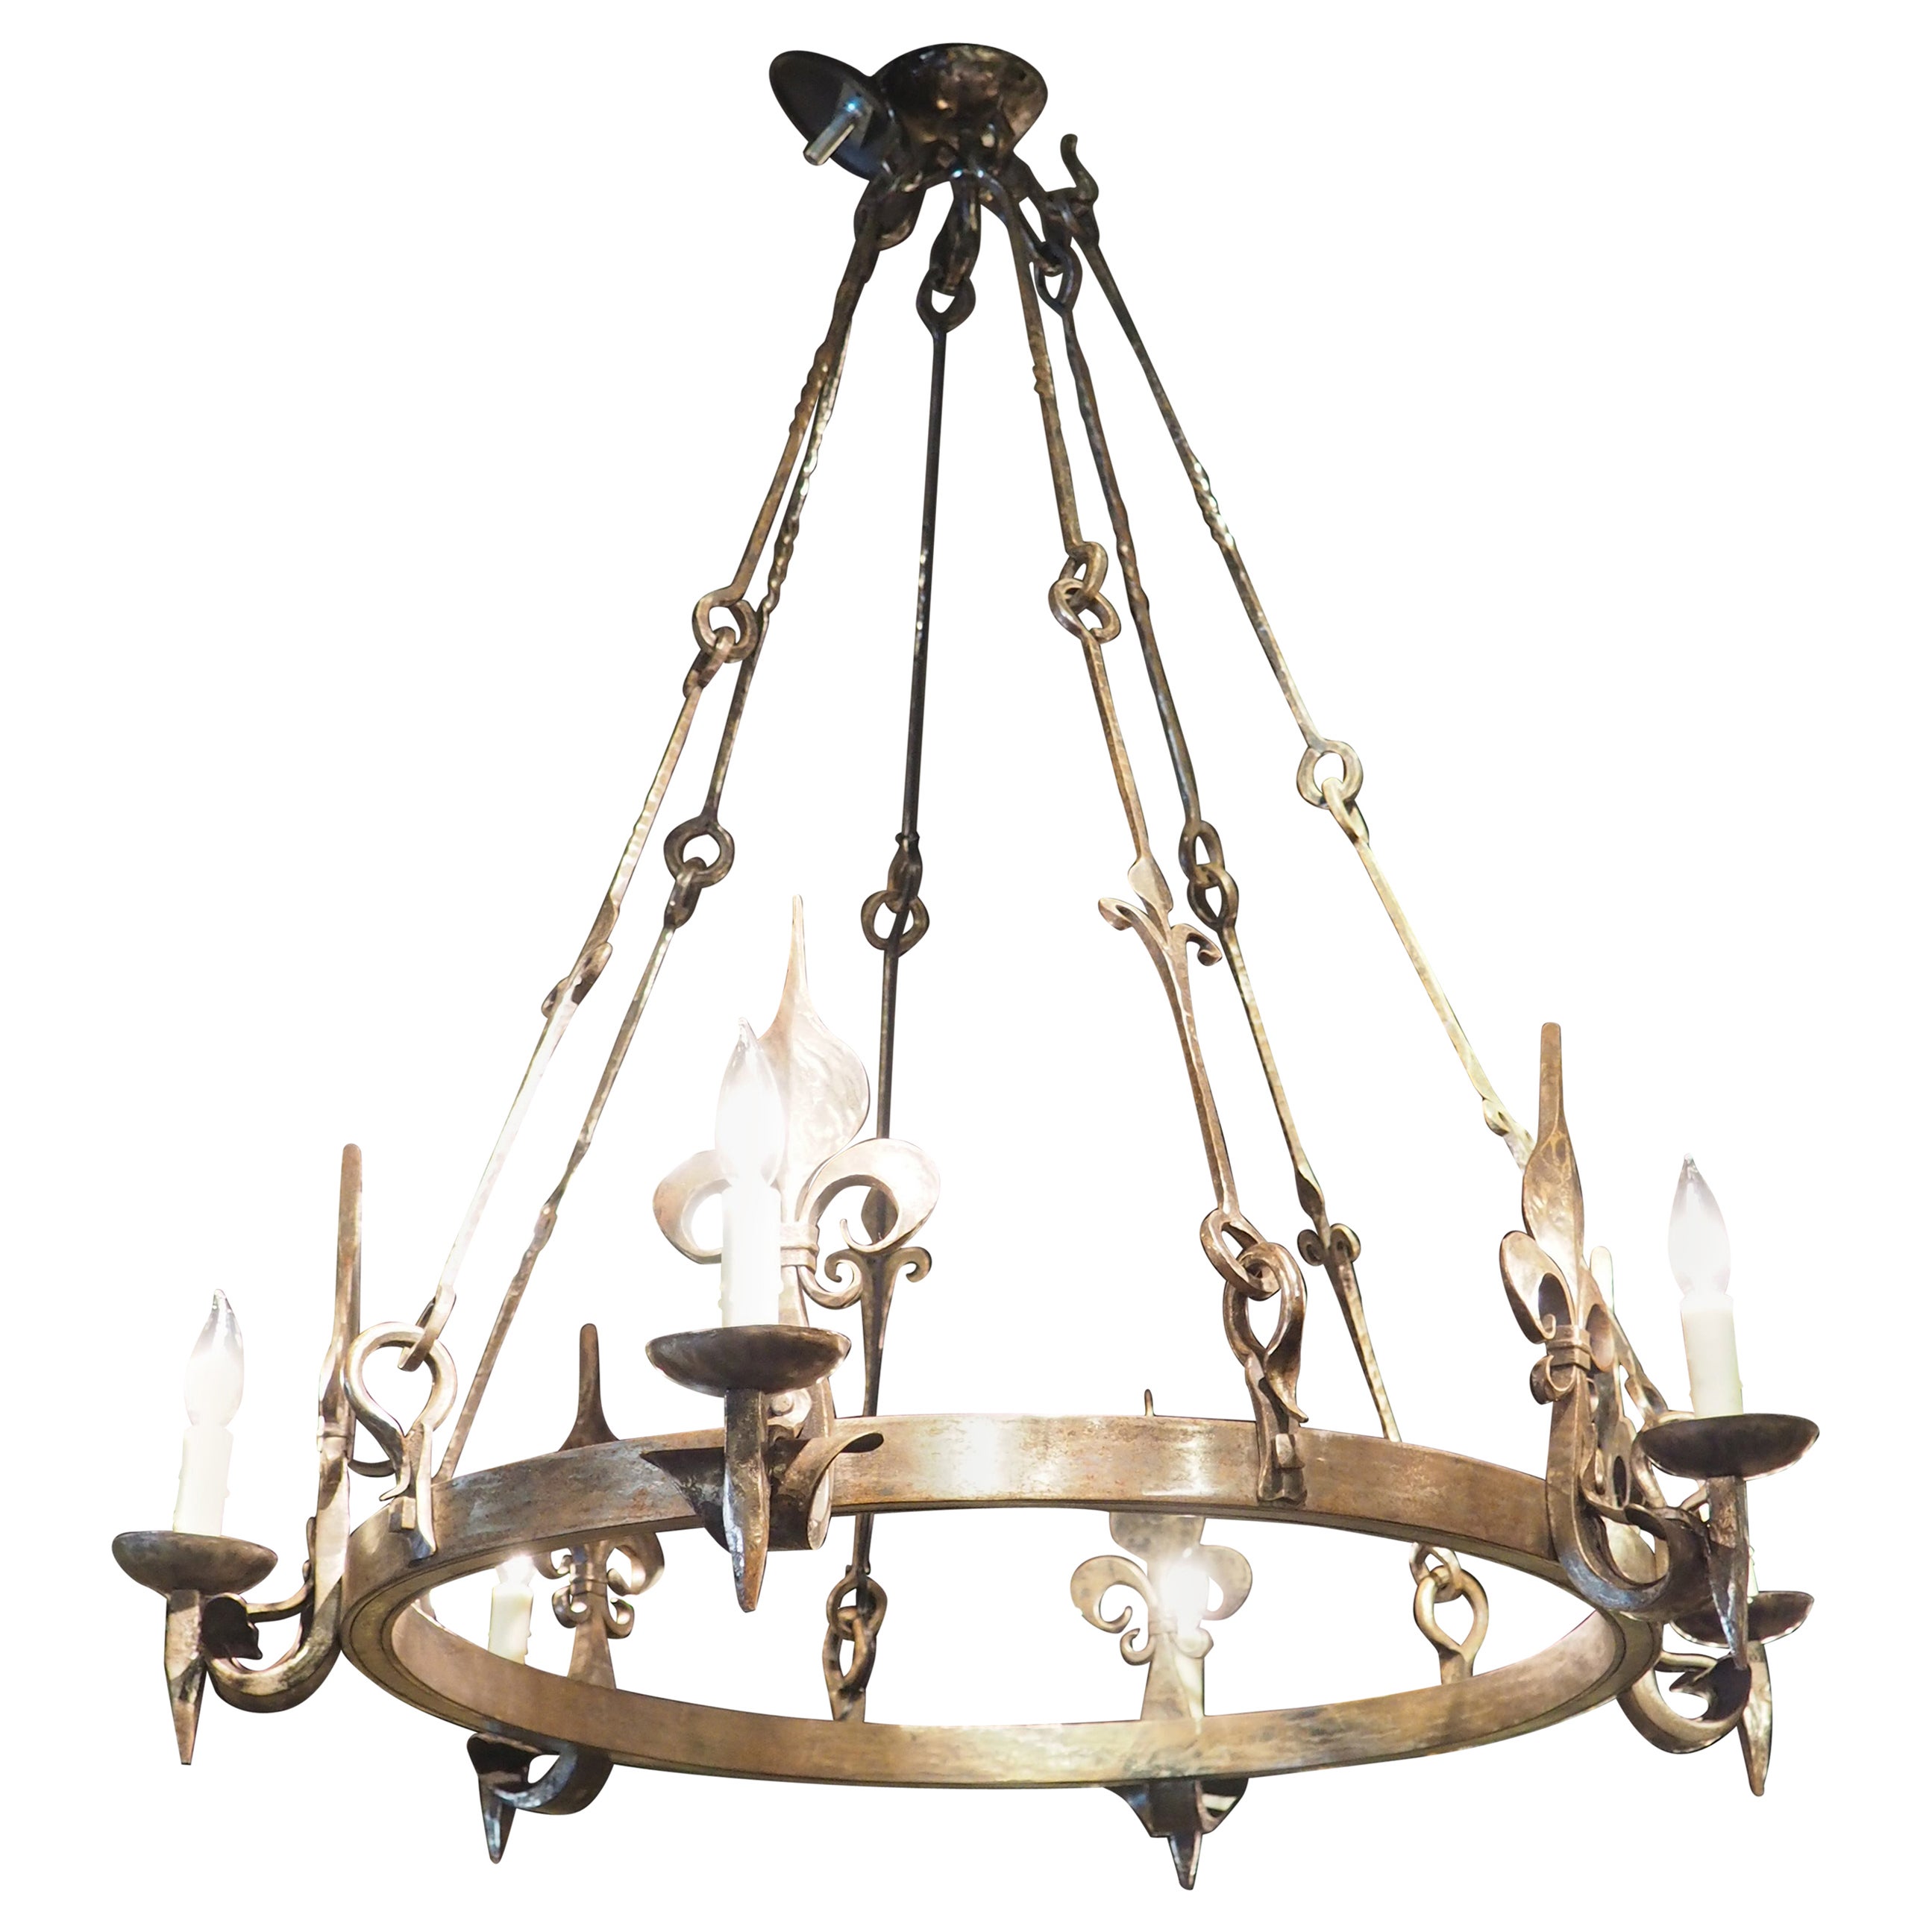 1960s Hand Wrought Iron Oval Fleur De Lys Chandelier from Brittany, France For Sale